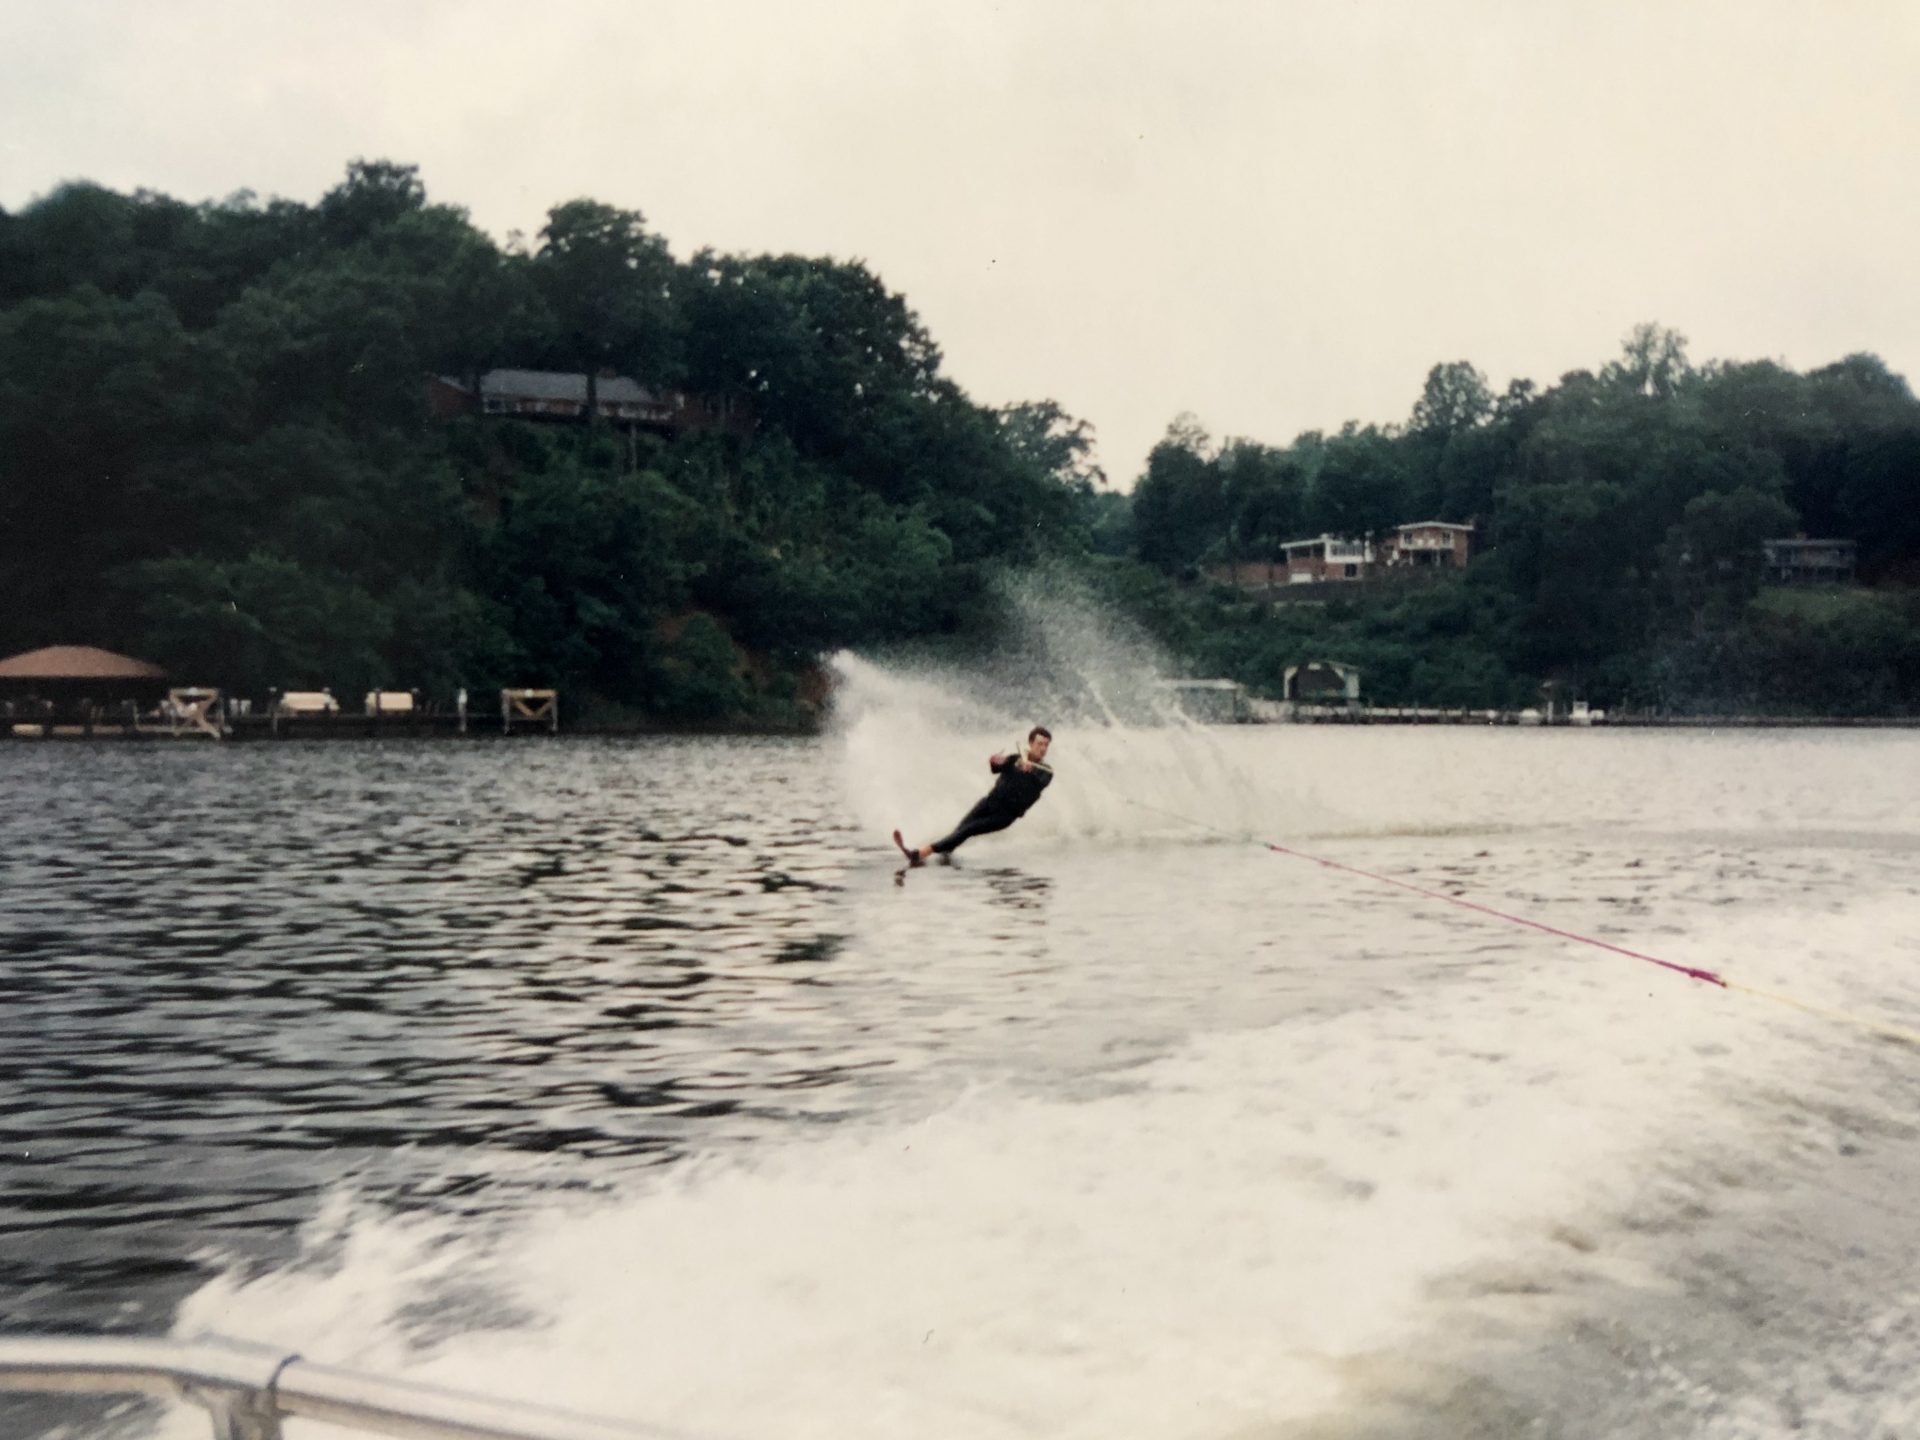 Tom loved water ski, he was pretty good on that sport too.